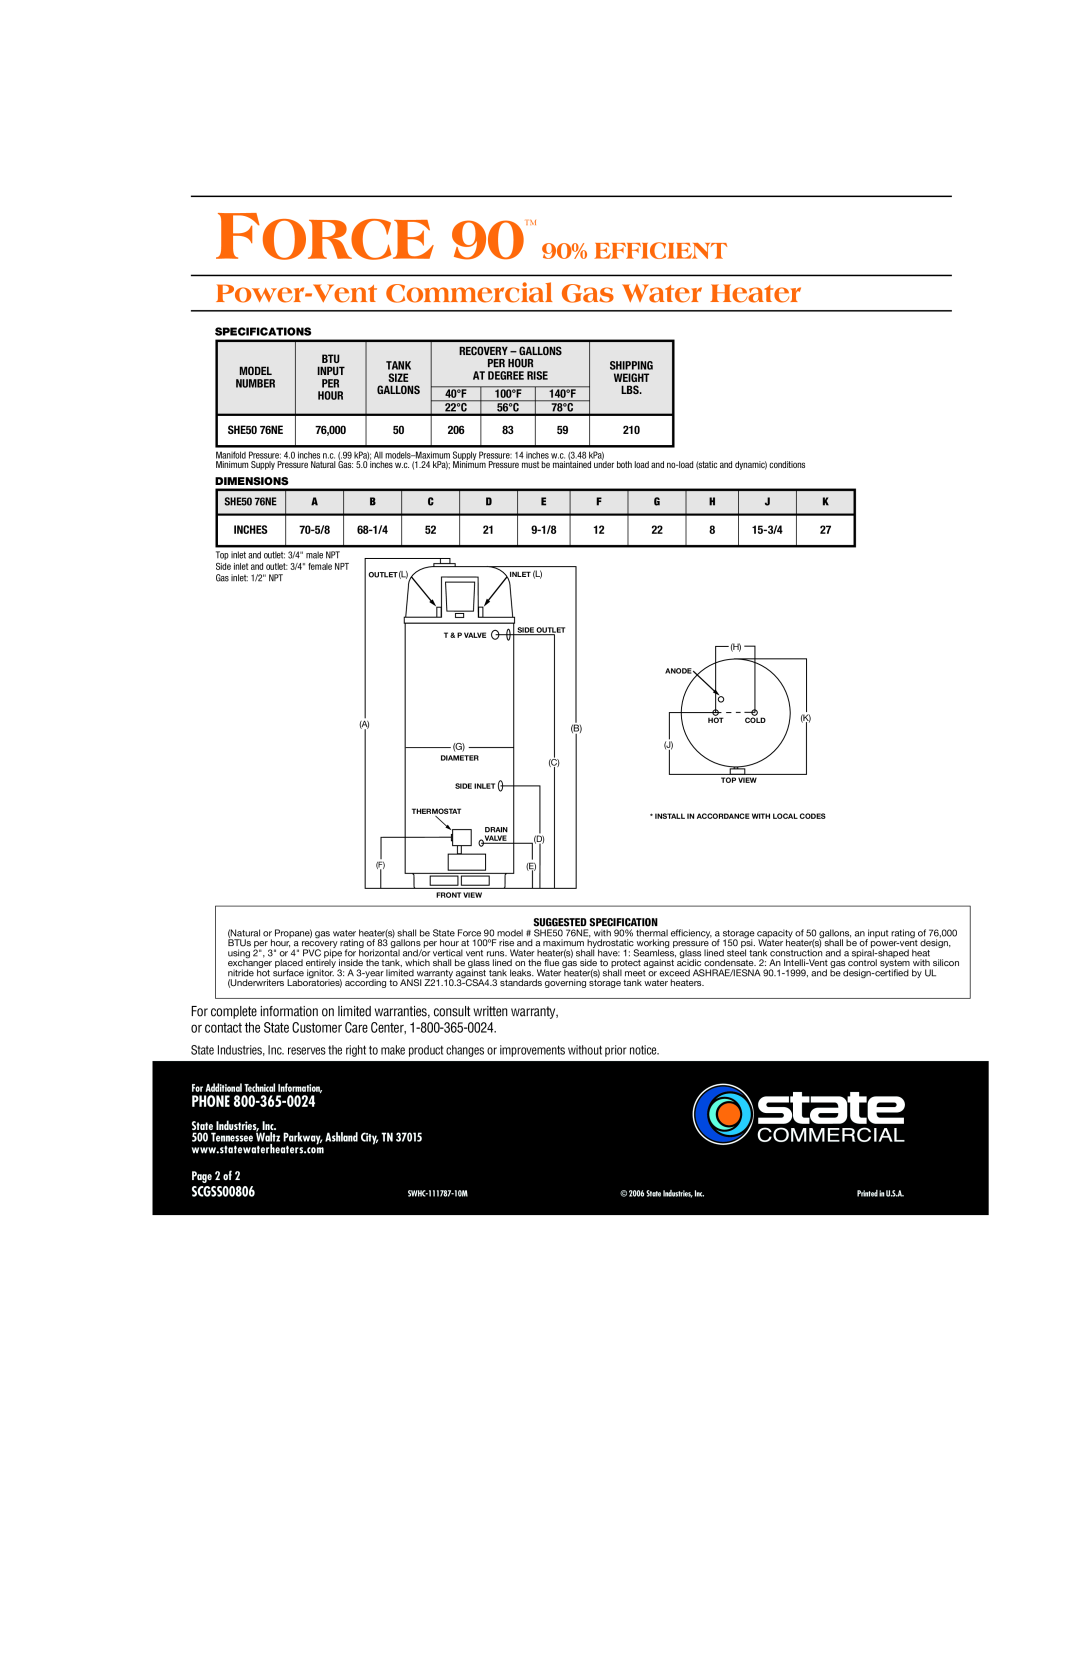 State Industries FORCE 90TM Power-VentCommercial Gas Water Heater, FORCE 90 90% EFFICIENT, Phone, SCGSS00806, Page 2 of 